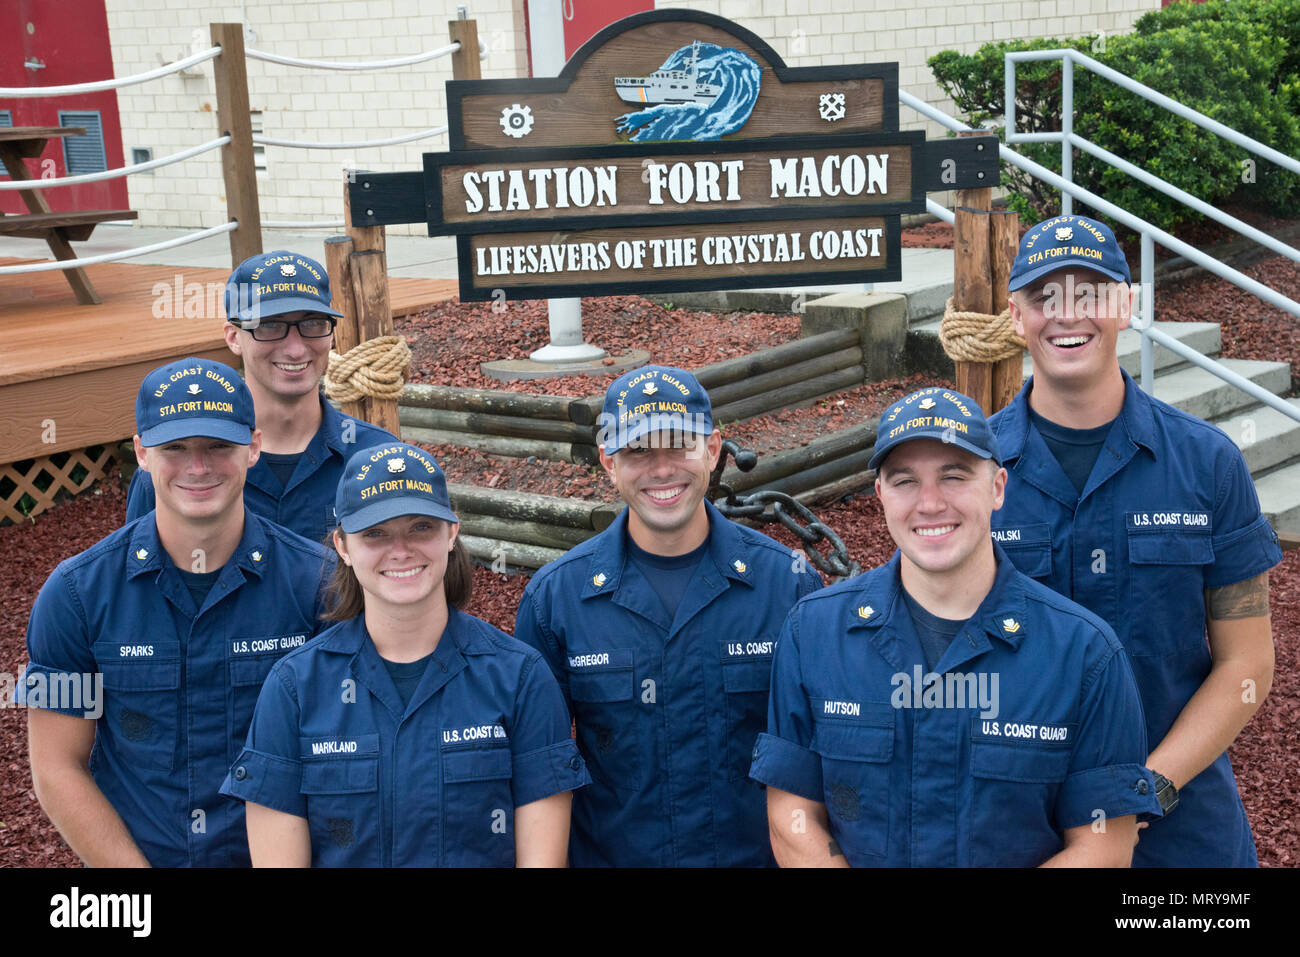 Petty Officer 3rd Class Michael Sparks (left to right), Fireman Samuel Ragsdale, Fireman Jordan Markland, Petty Officer 2nd Class Tyler McGregor, Petty Officer 2nd Class Zane Hutson and Seaman Crewe Goralski reunite at Station Fort Macon, North Carolina, July 10, 2017. Sparks and Ragsdale were rescued by the others July 6 after a diving incident where the two were stranded eight miles off Atlantic Beach. (U.S. Coast Guard photo by Petty Officer 2nd Class Nate Littlejohn) Stock Photo